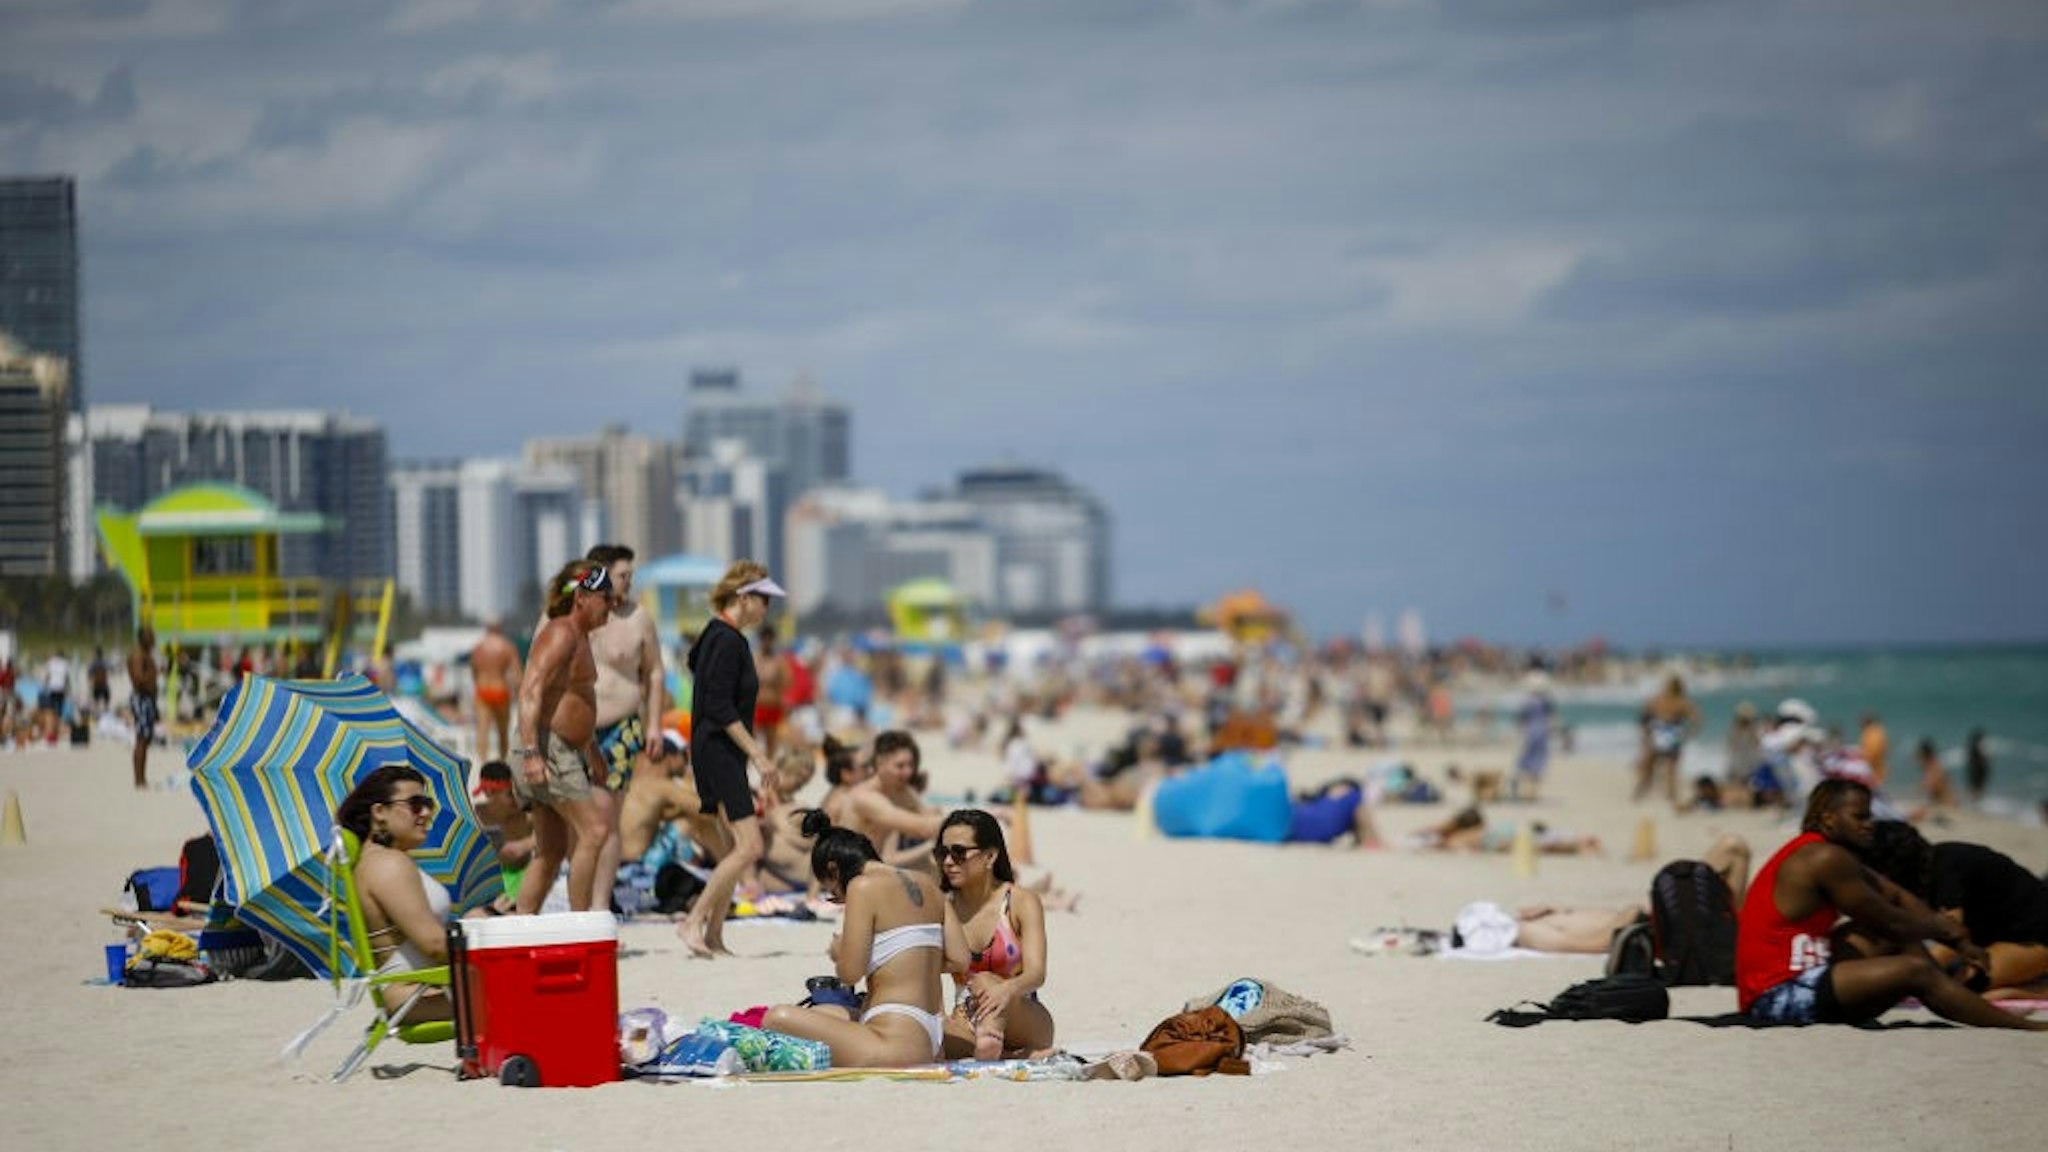 People gather on a beach in Miami, Florida, U.S., on Saturday, March 5, 2021. Even with some colleges canceling their mid-semester breaks, students from more than 200 schools are expected to visit Miami Beach during spring break, which runs from late February to mid-April. Photographer: